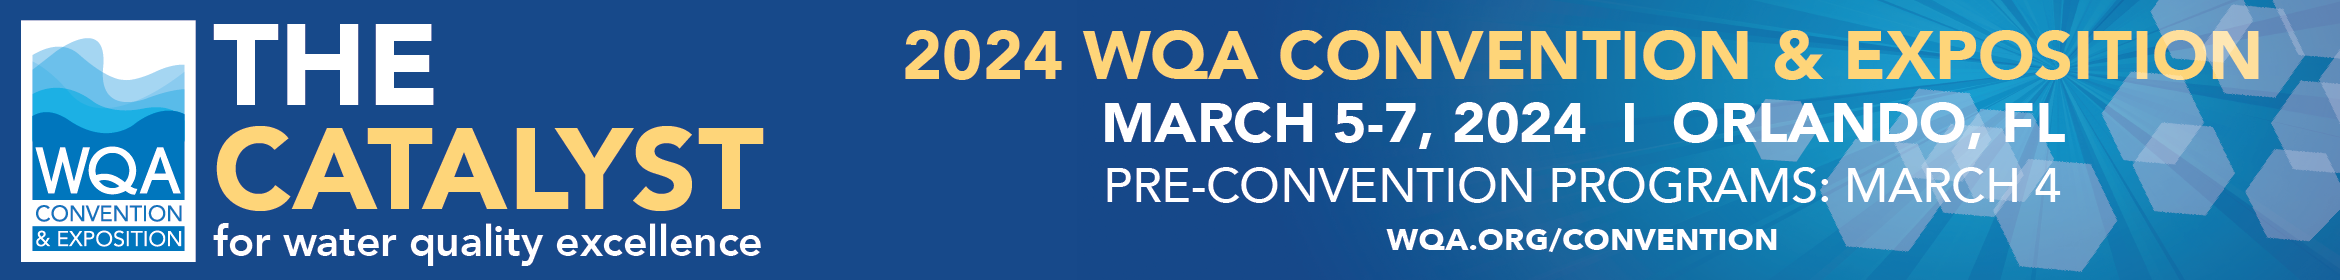 2024 WQA Convention and Exposition Main banner